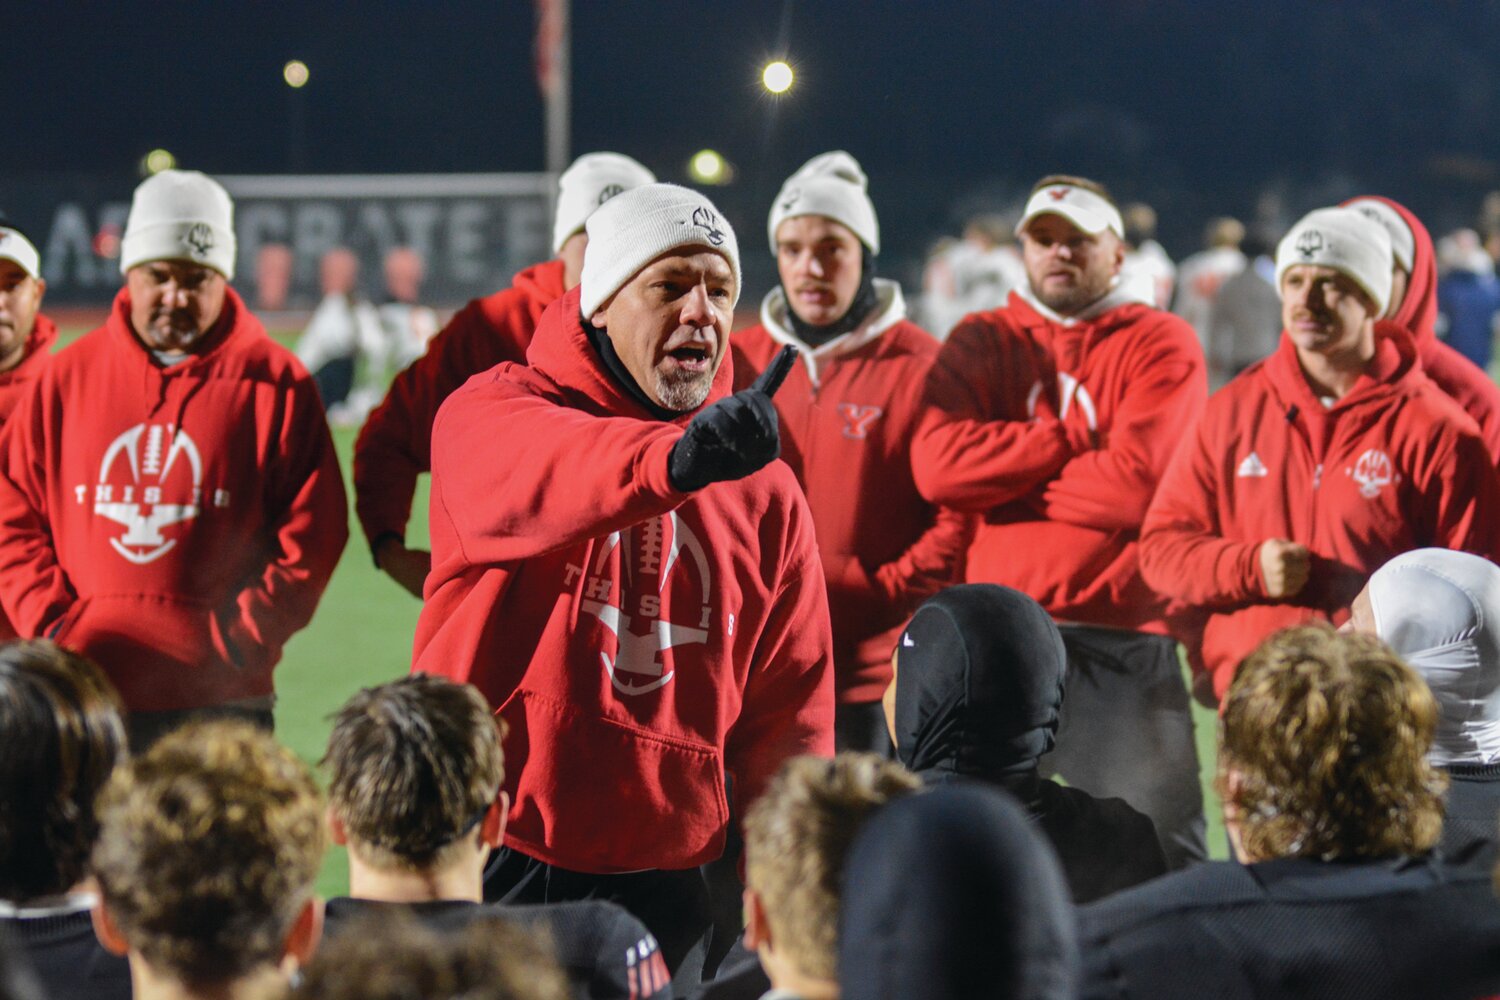 Yelm’s head coach Jason Ronquillo holds up one finger, signifying the one remaining game on Yelm’s schedule— the 3A State Championship. The contest is set for 7 p.m. Friday, Dec. 1 at Husky Stadium in Seattle.